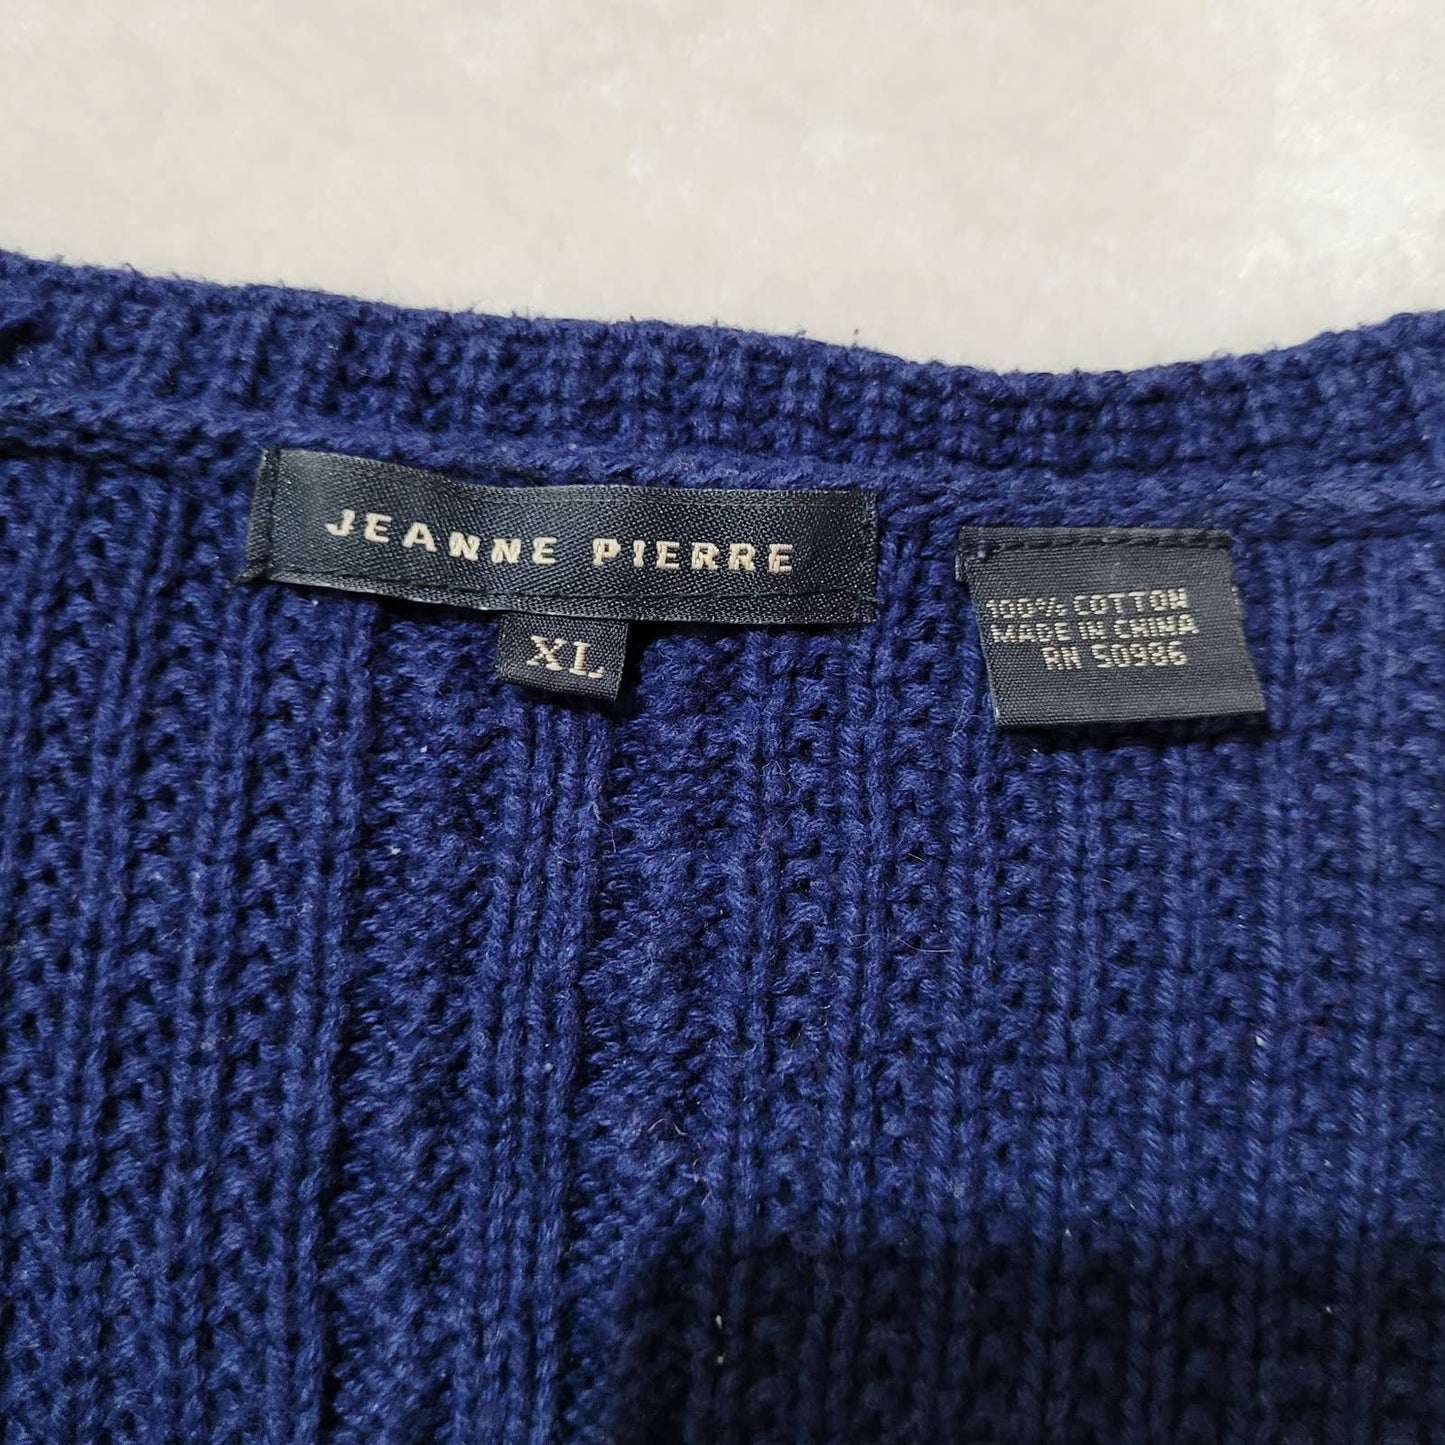 Jeanne Pierre Navy Cable Knit Sweater 3/4 Sleeves - Size Extra Large